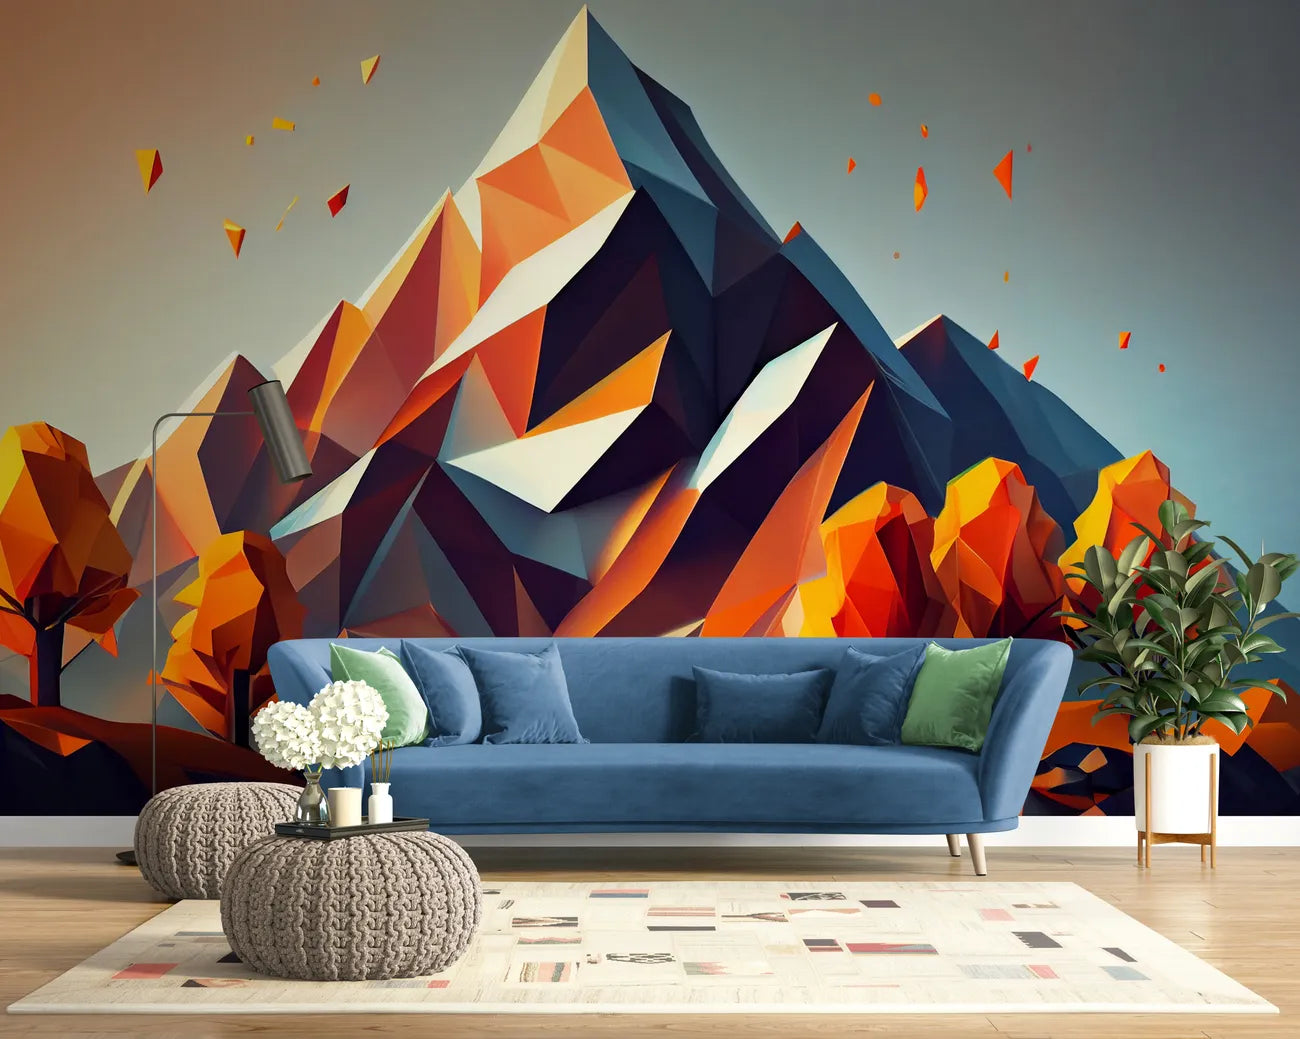 Geometric mountain and autumn forest wallpaper